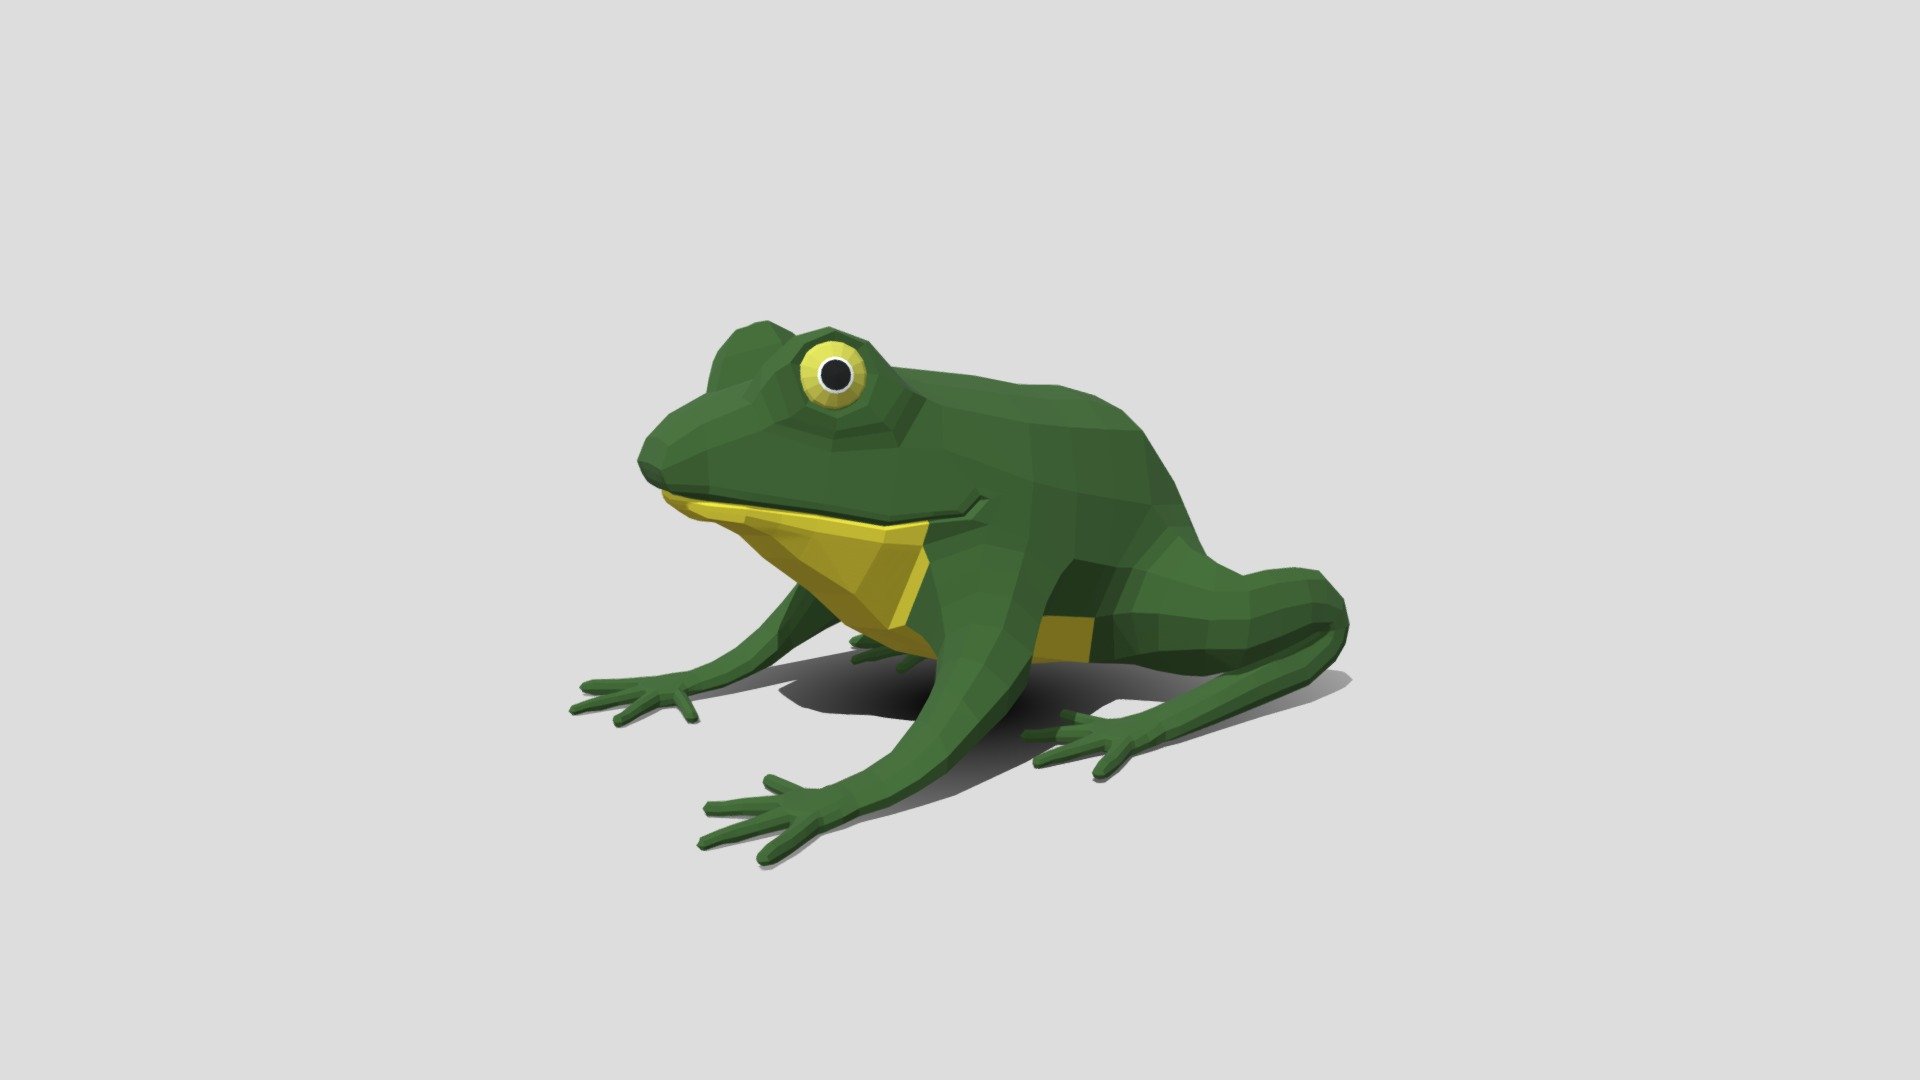 This is a low poly 3D model of a Frog. The low poly frog was modeled and prepared for low-poly style renderings, background, general CG visualization presented as 2 meshes with quads/tris.

The eyes, is a seperate object.

Verts : 1.939 Faces : 1.968

The 3D model have simple materials with diffuse colors.

No ring, maps and no UVW mapping is available.

The original file was created in blender. You will receive a 3DS, OBJ, FBX, blend, DAE, Stl, gLTF.

All preview images were rendered with Blender Cycles. Product is ready to render out-of-the-box. Please note that the lights, cameras, and background is only included in the .blend file. The model is clean and alone in the other provided files, centred at origin and has real-world scale 3d model